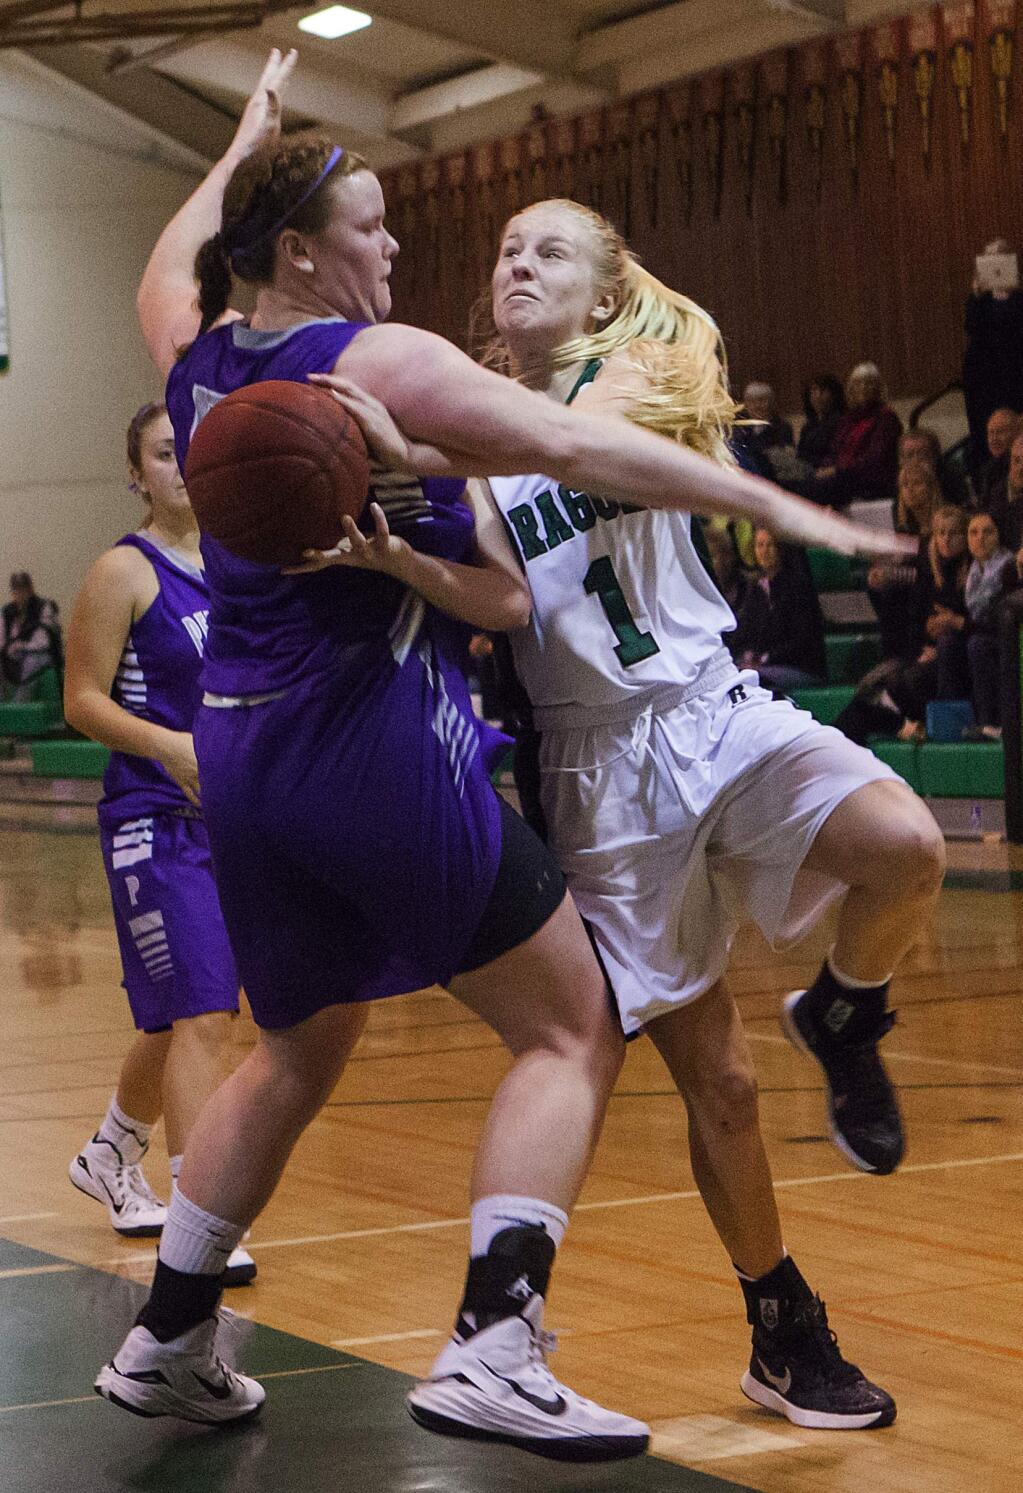 Robbi Pengelly/Index-TribuneJunior Sami Von Gober (No. 1) is fouled during the Lady Dragons' earlier SCL victory over longtime rival Petaluma Tuesday night in Pfeiffer Gym. On Tuesday, the Trojan girls avenged their Sonoma loss on their home court.